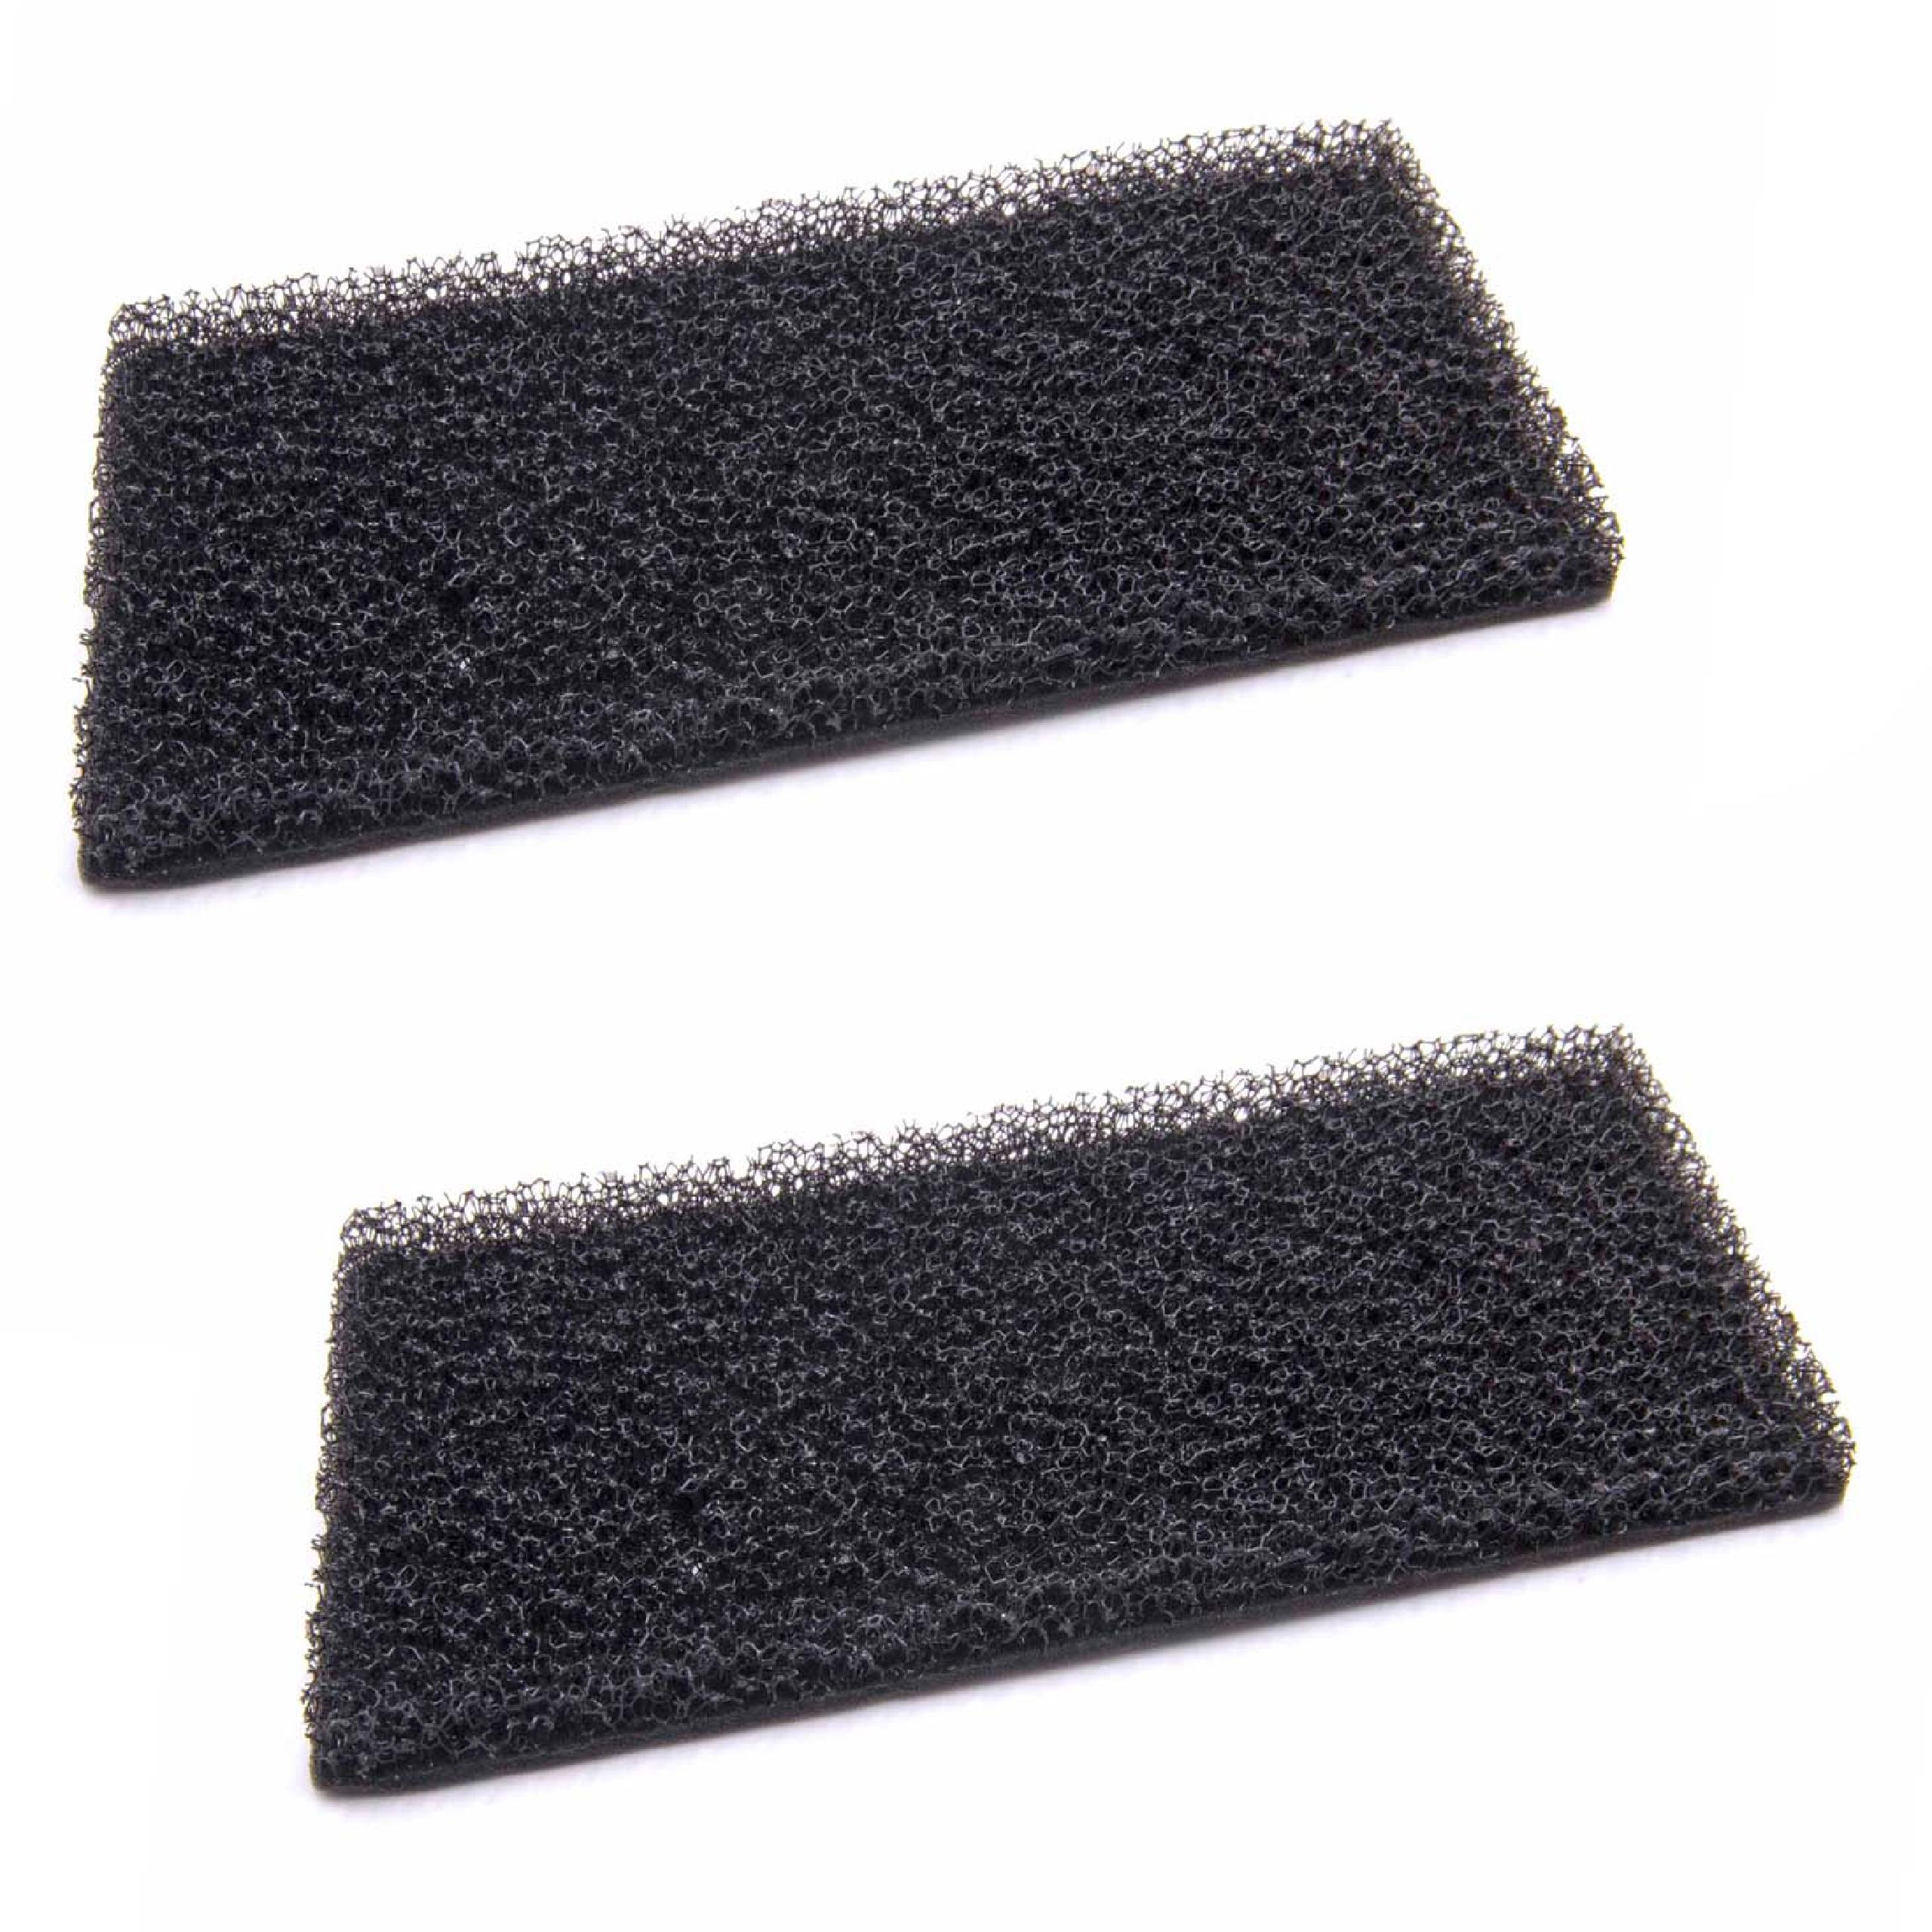 Filter Set (2x foam filter) as Replacement for Whirlpool / Bauknecht Group 481010716911 Tumble Dryer etc.